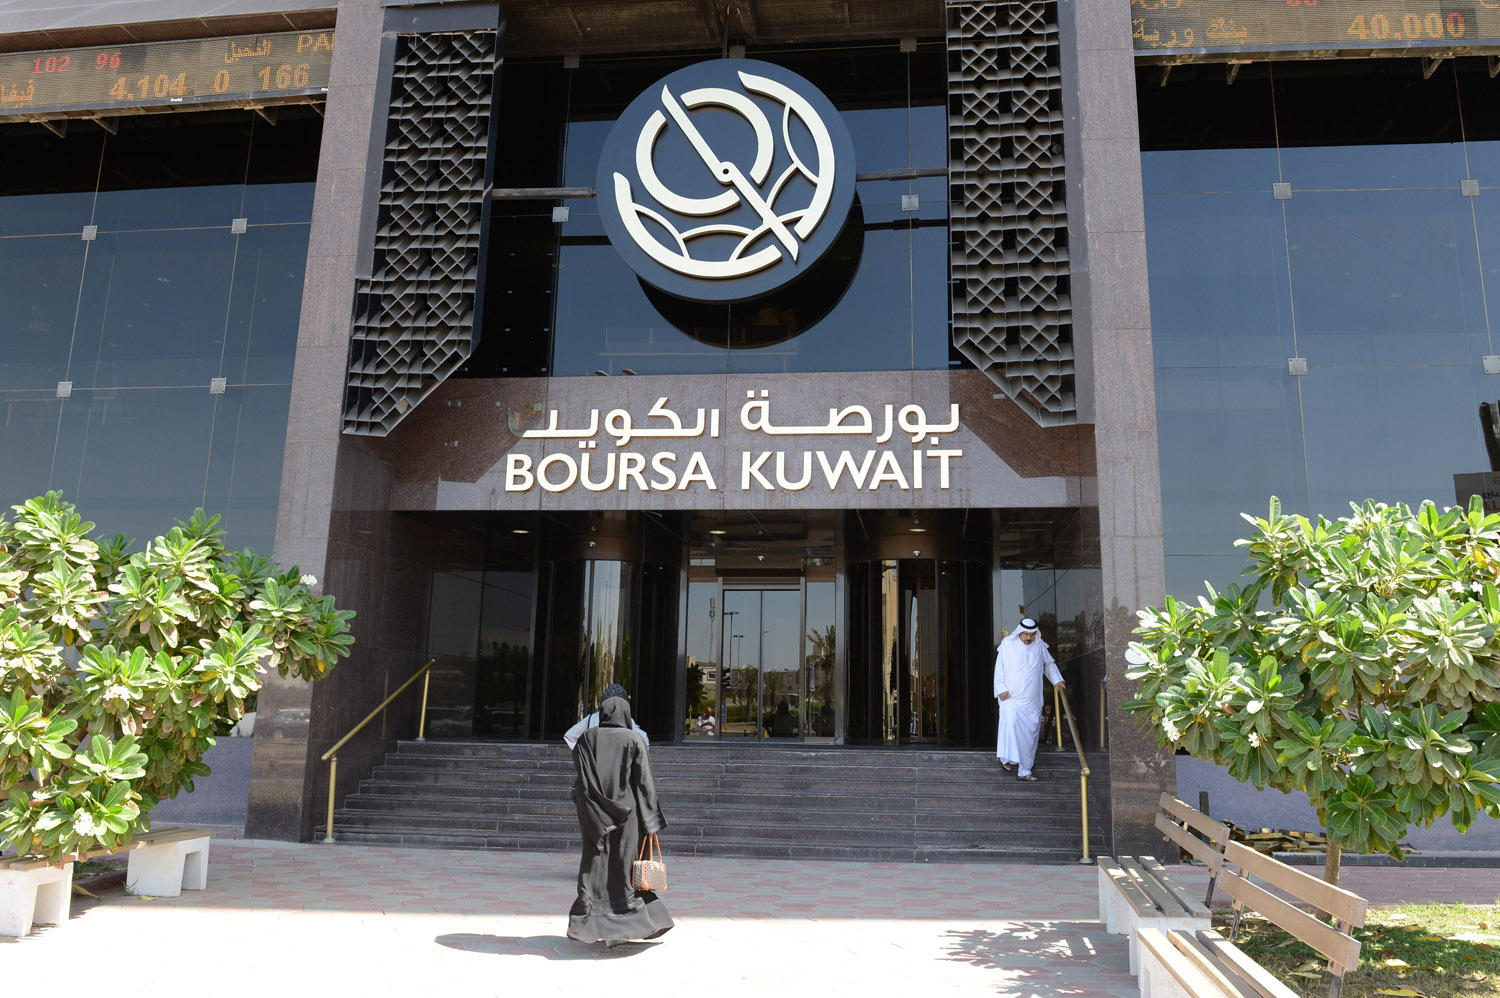 Kuwait Bourse ends trading in mixed boards                                                                                                                                                                                                                